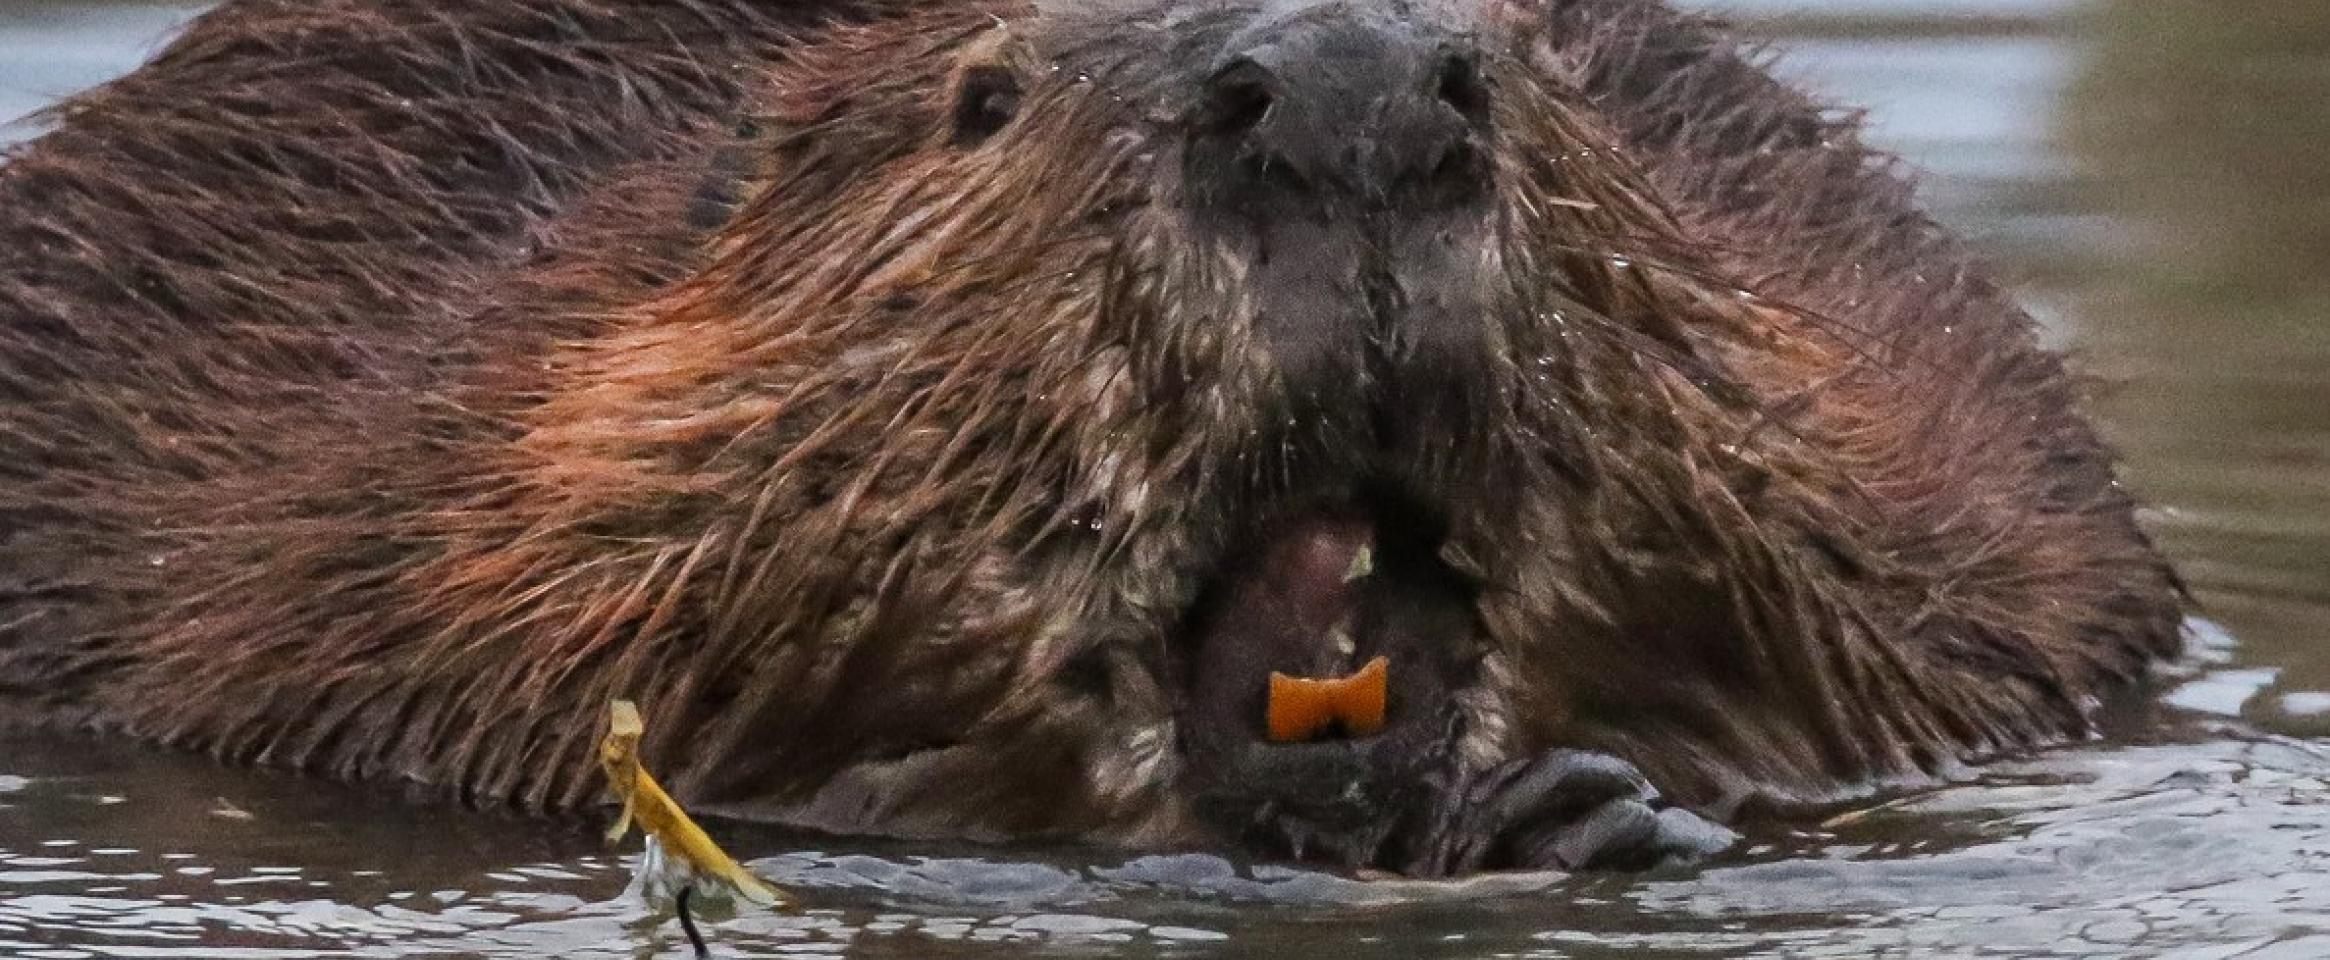 Closeup photo of a beaver's face, exposing its colored incisors, as it surfaces on a lake.